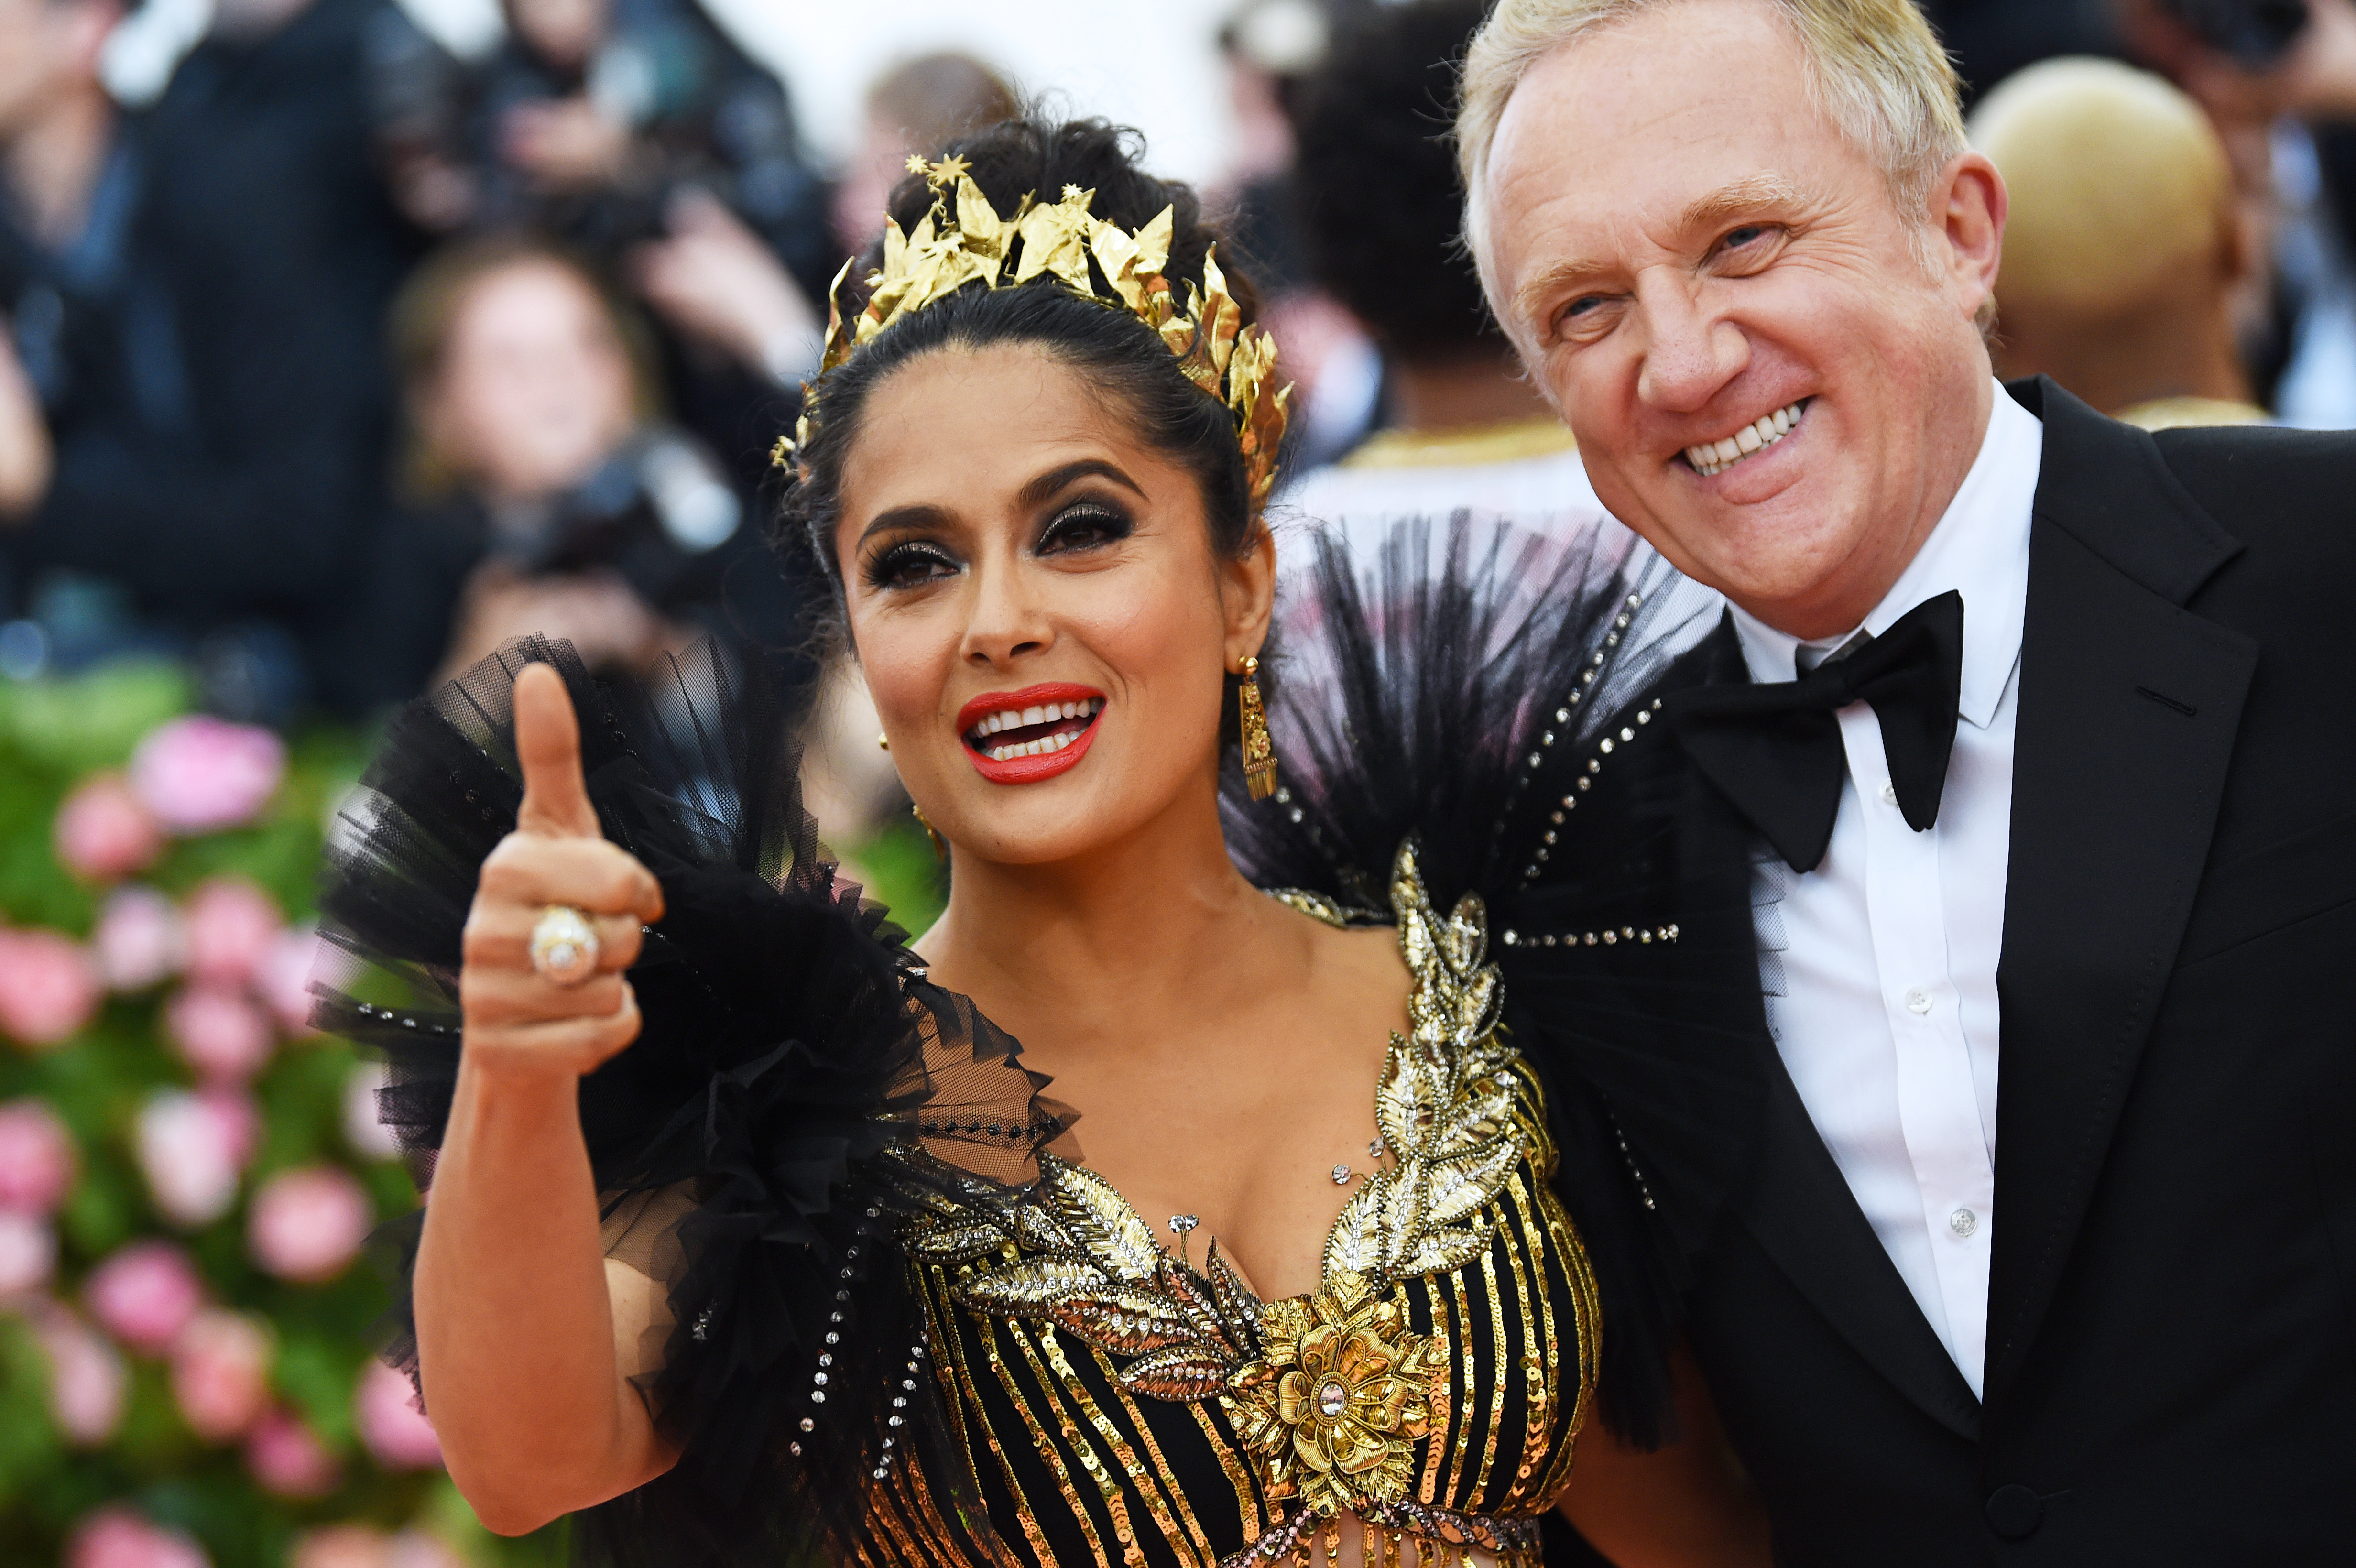 Salma Hayek Defends The Idea She Married Her Husband For His Billions